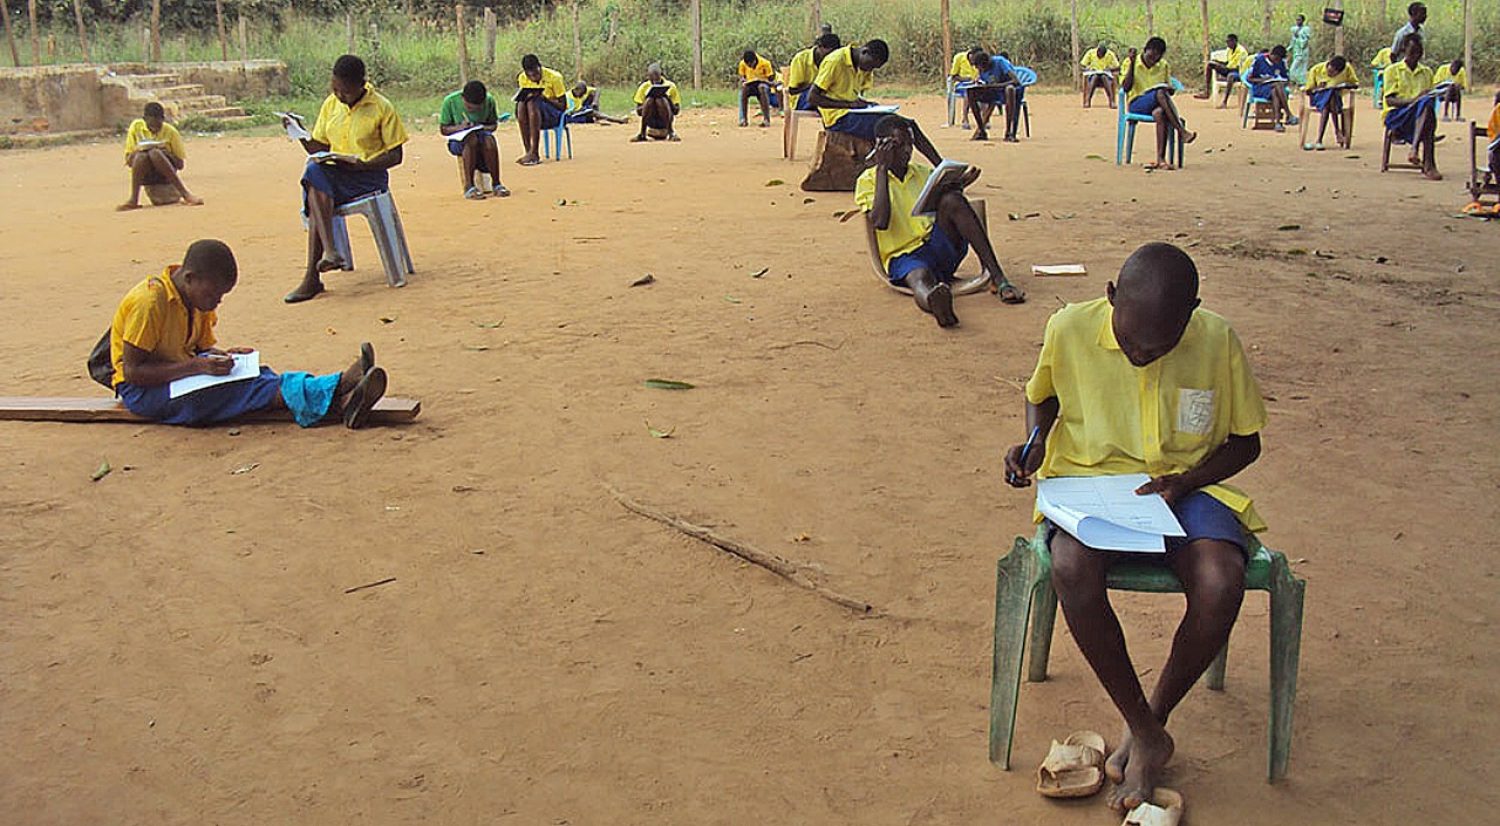 Education in emergency – Students study after class in Yambio, South Sudan, where outbreaks of violence have deterred many from enrolling in school.